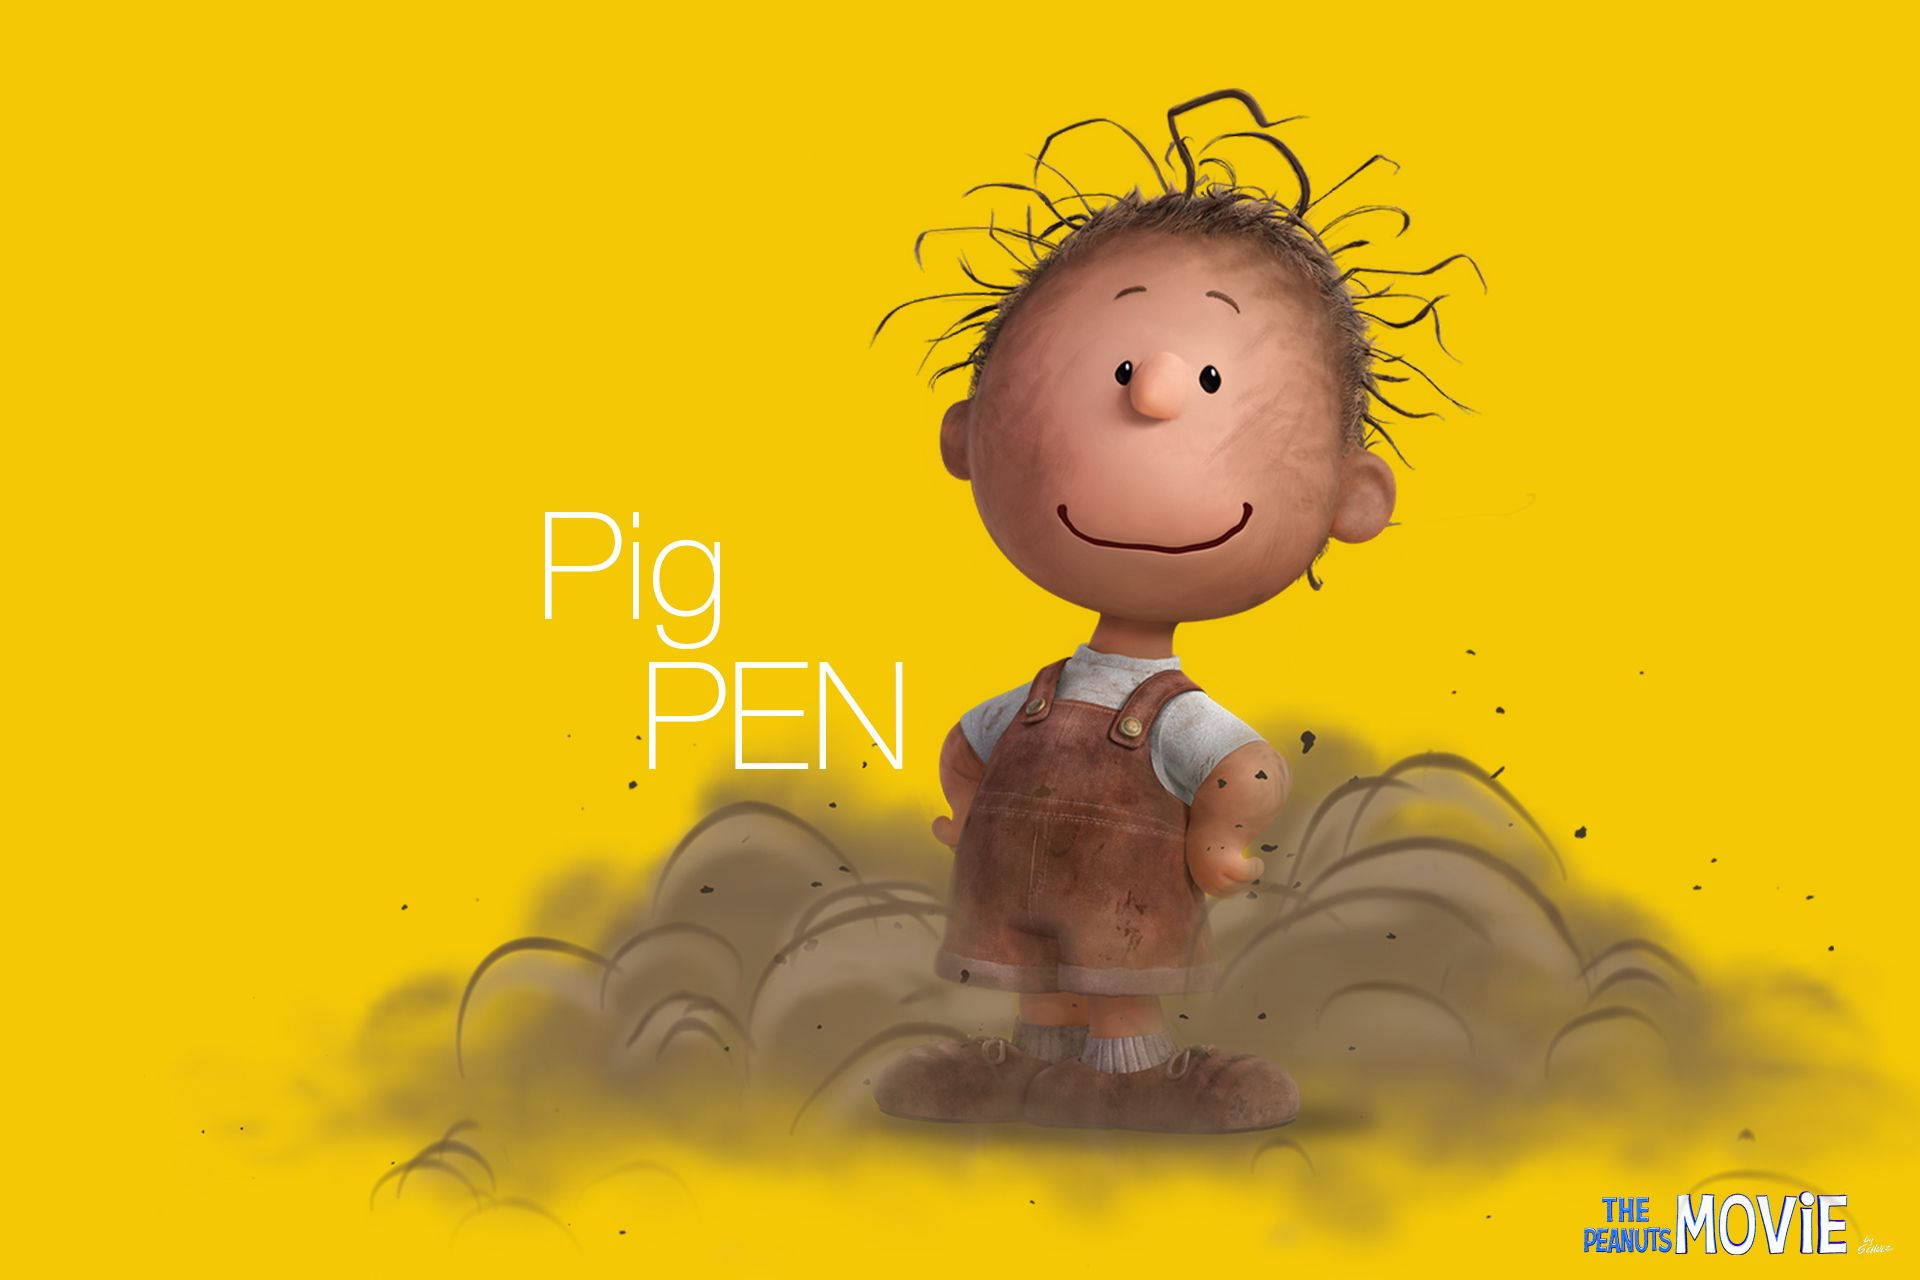 Pig-pen From Peanuts Movie Background